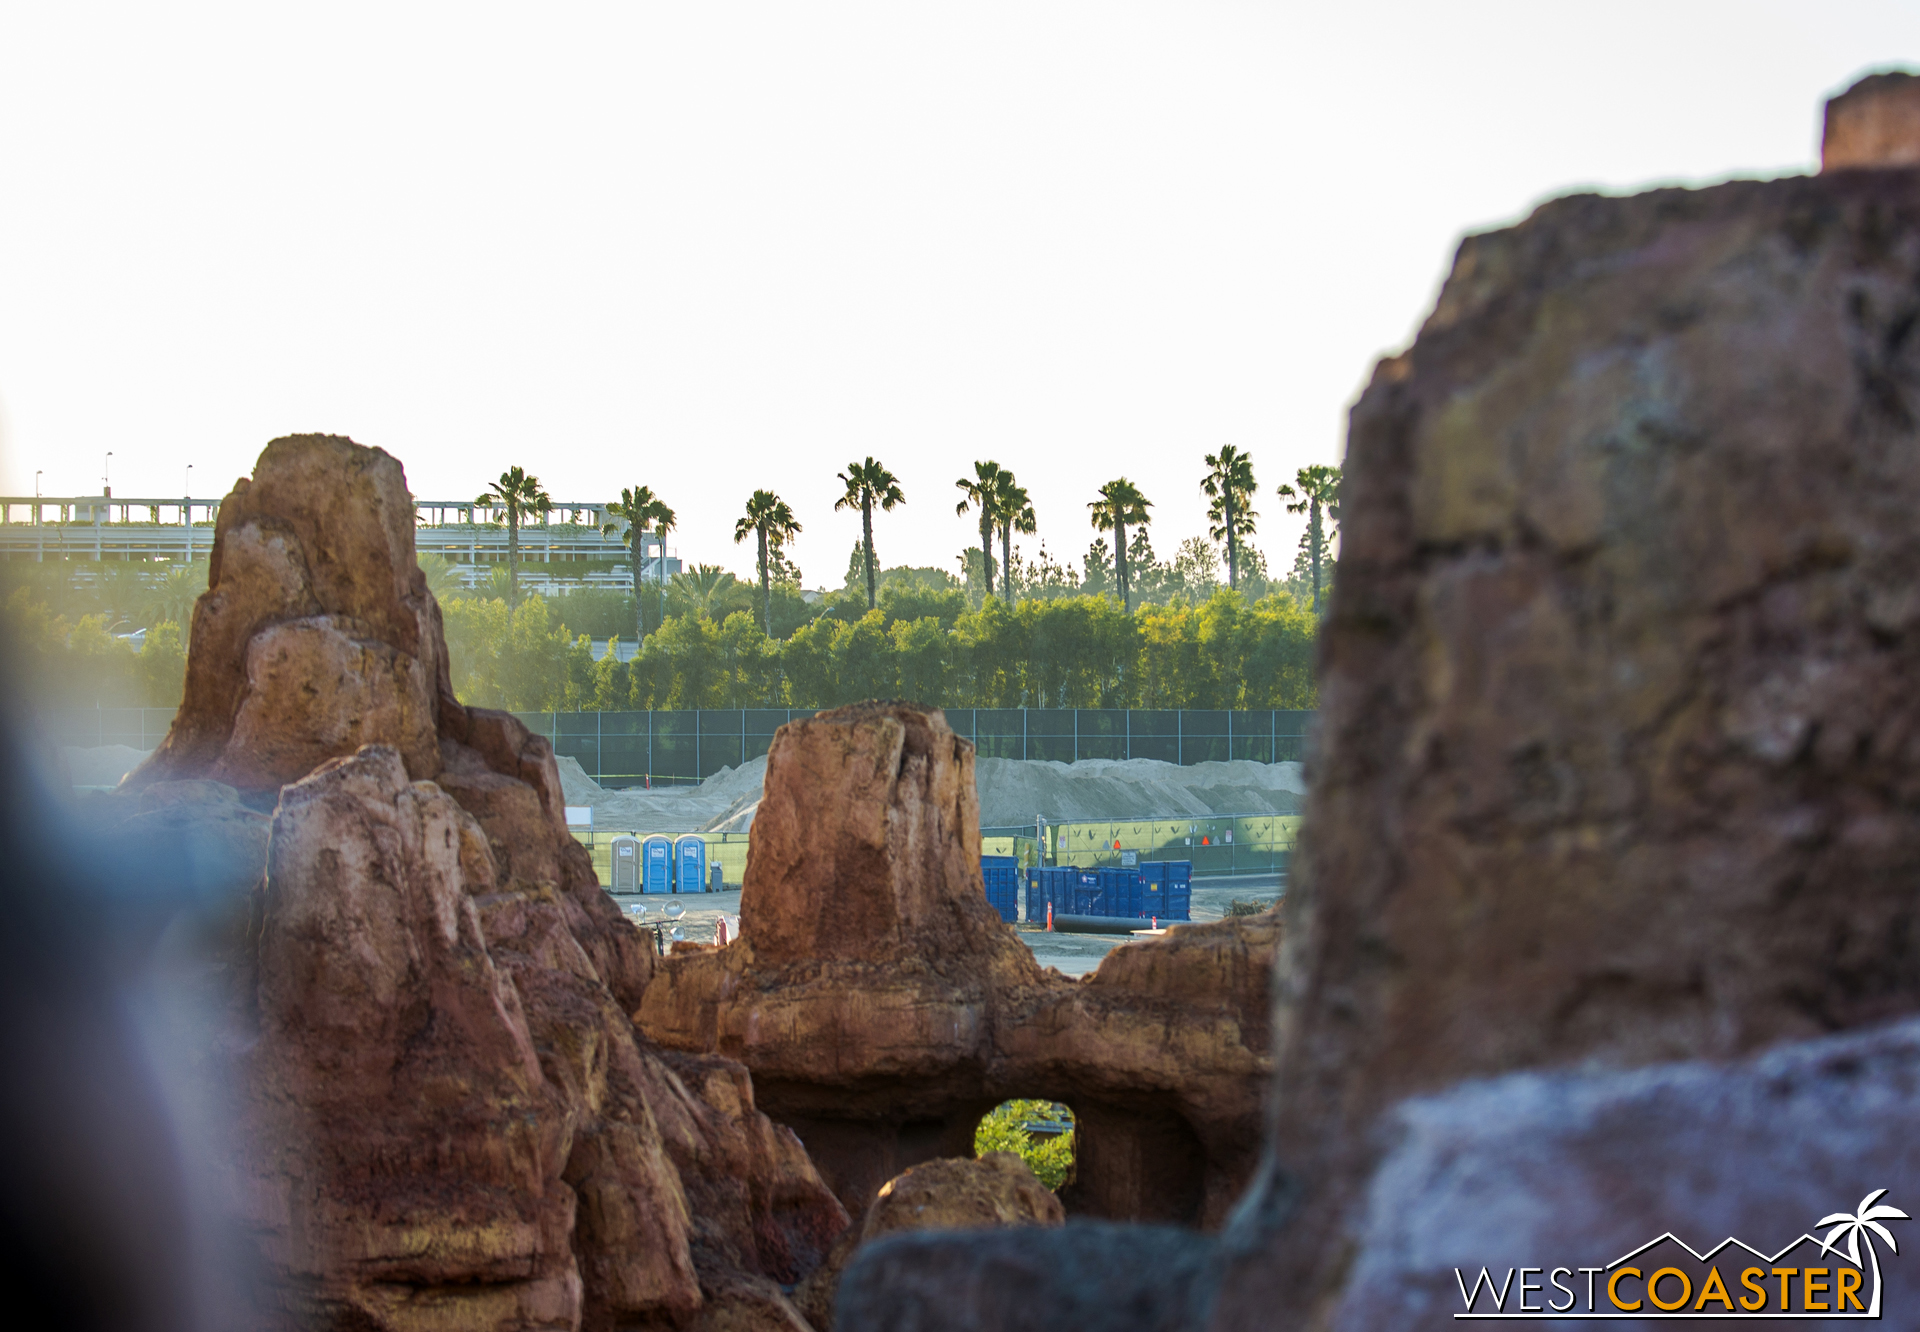  Another glimpse of the site from Big Thunder Mountain Railroad. 